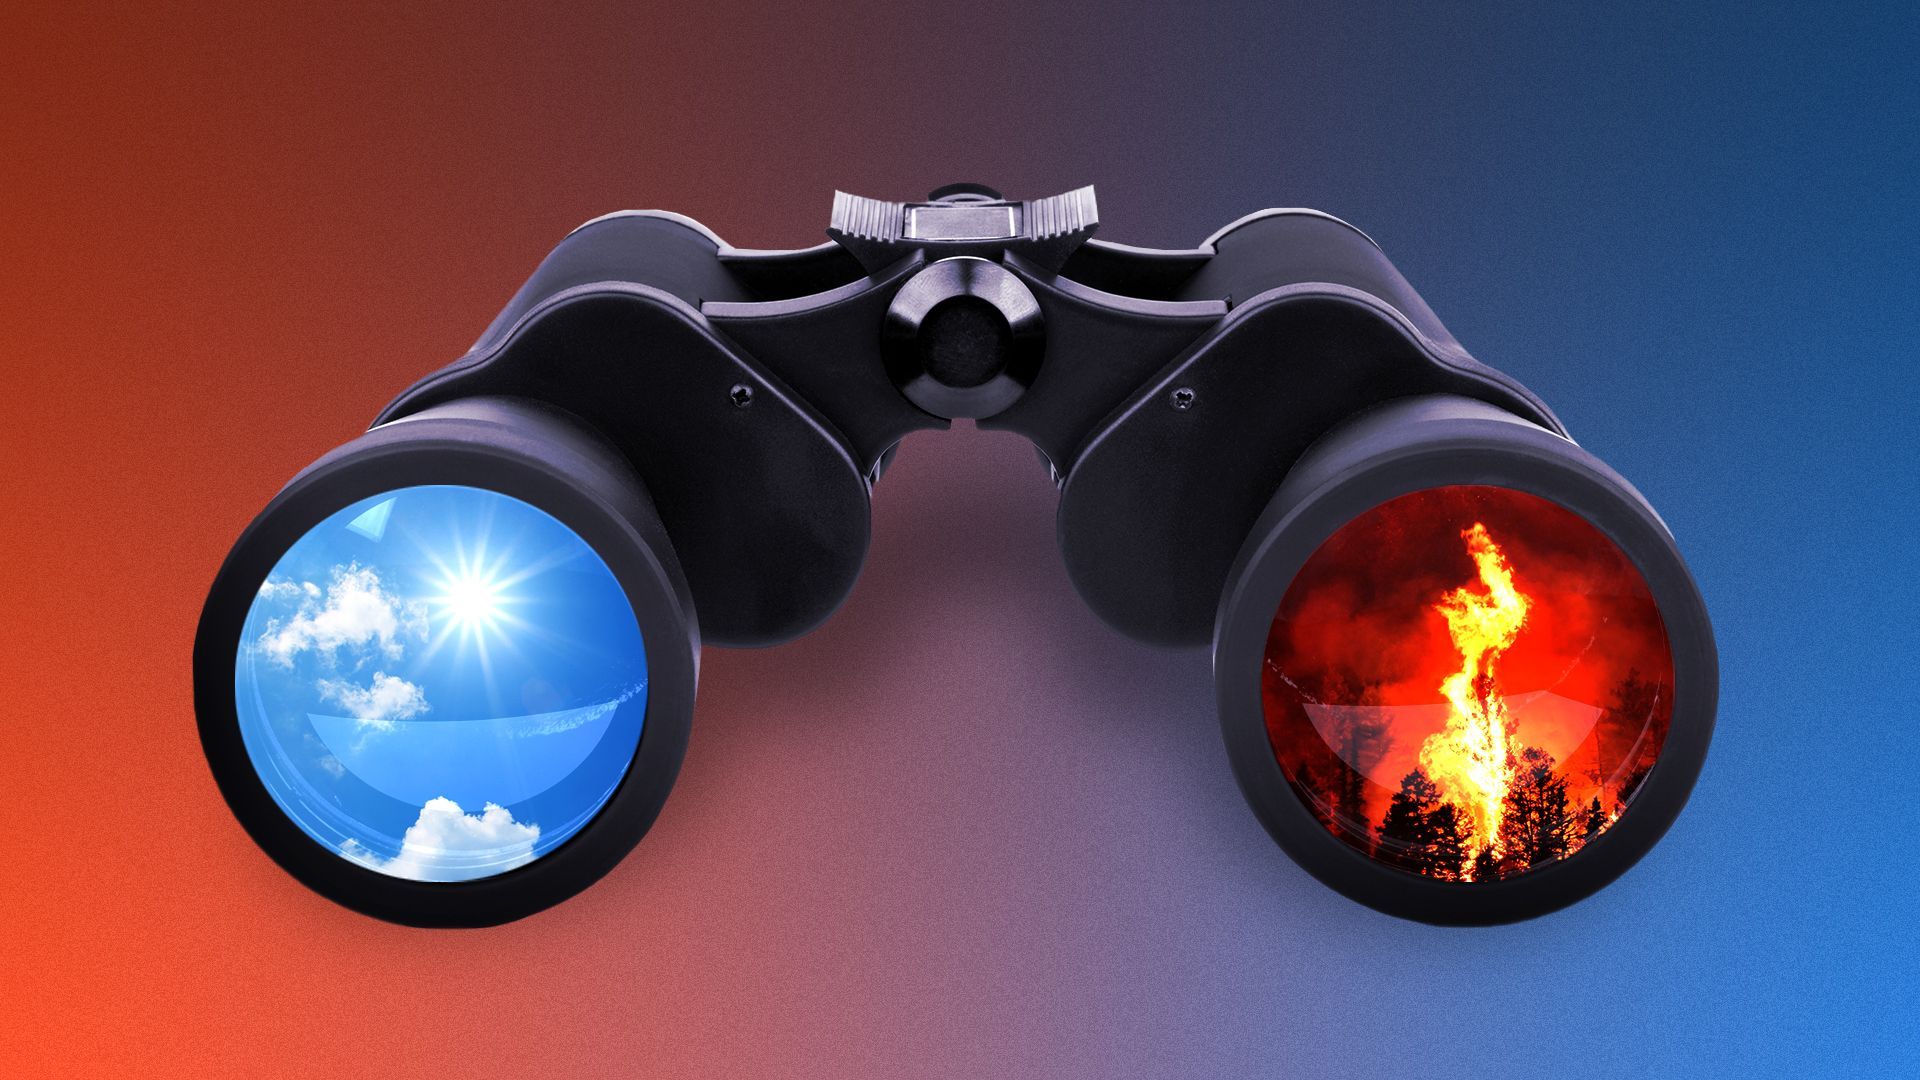 Illustration of binoculars. One lens is a sunny blue sky, the other shows a wildfire.